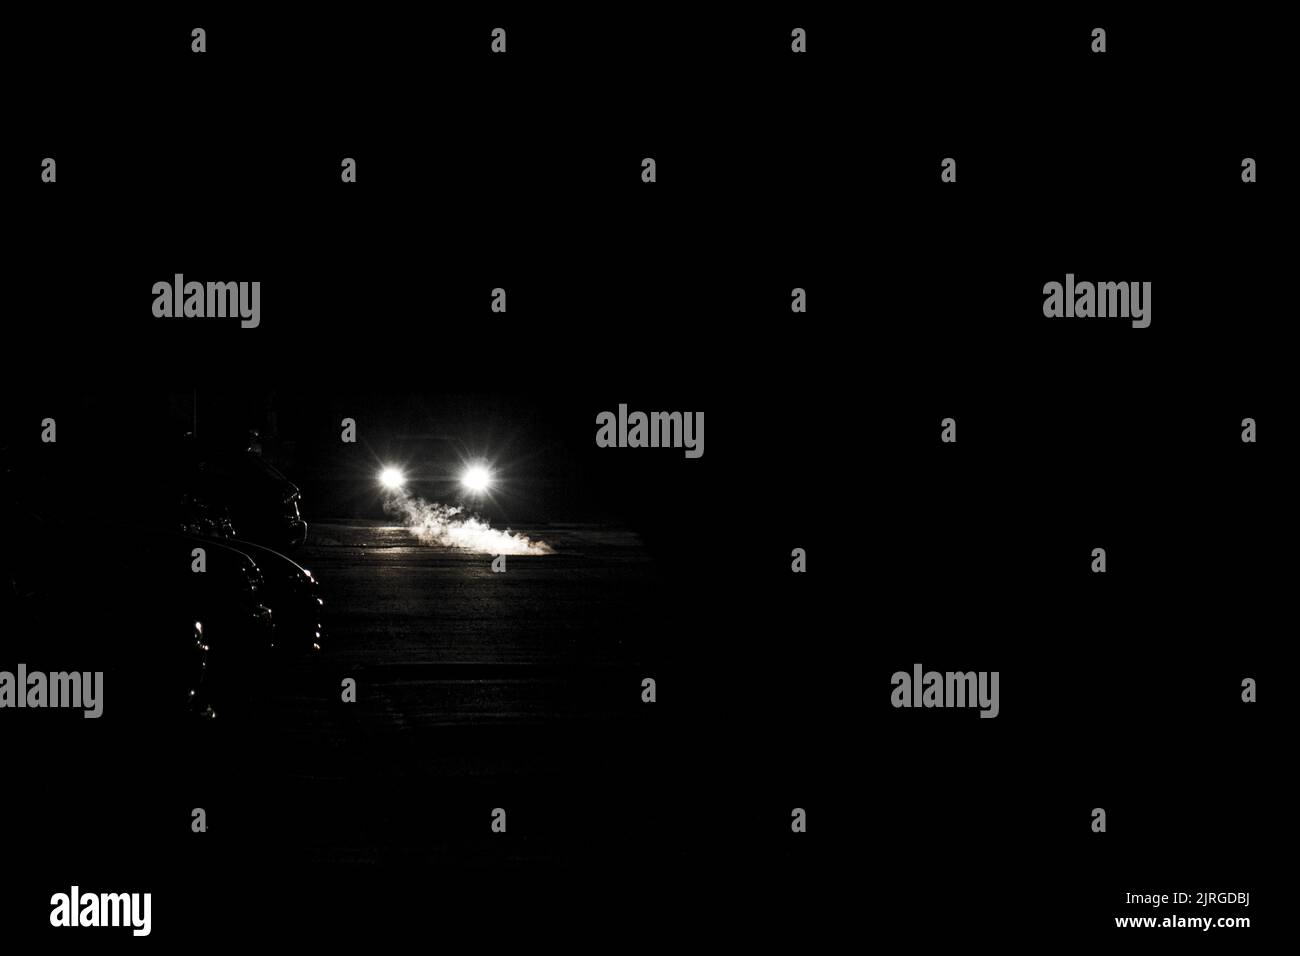 Night landscape in the form of steam and cars illuminated by car headlights. Stock Photo